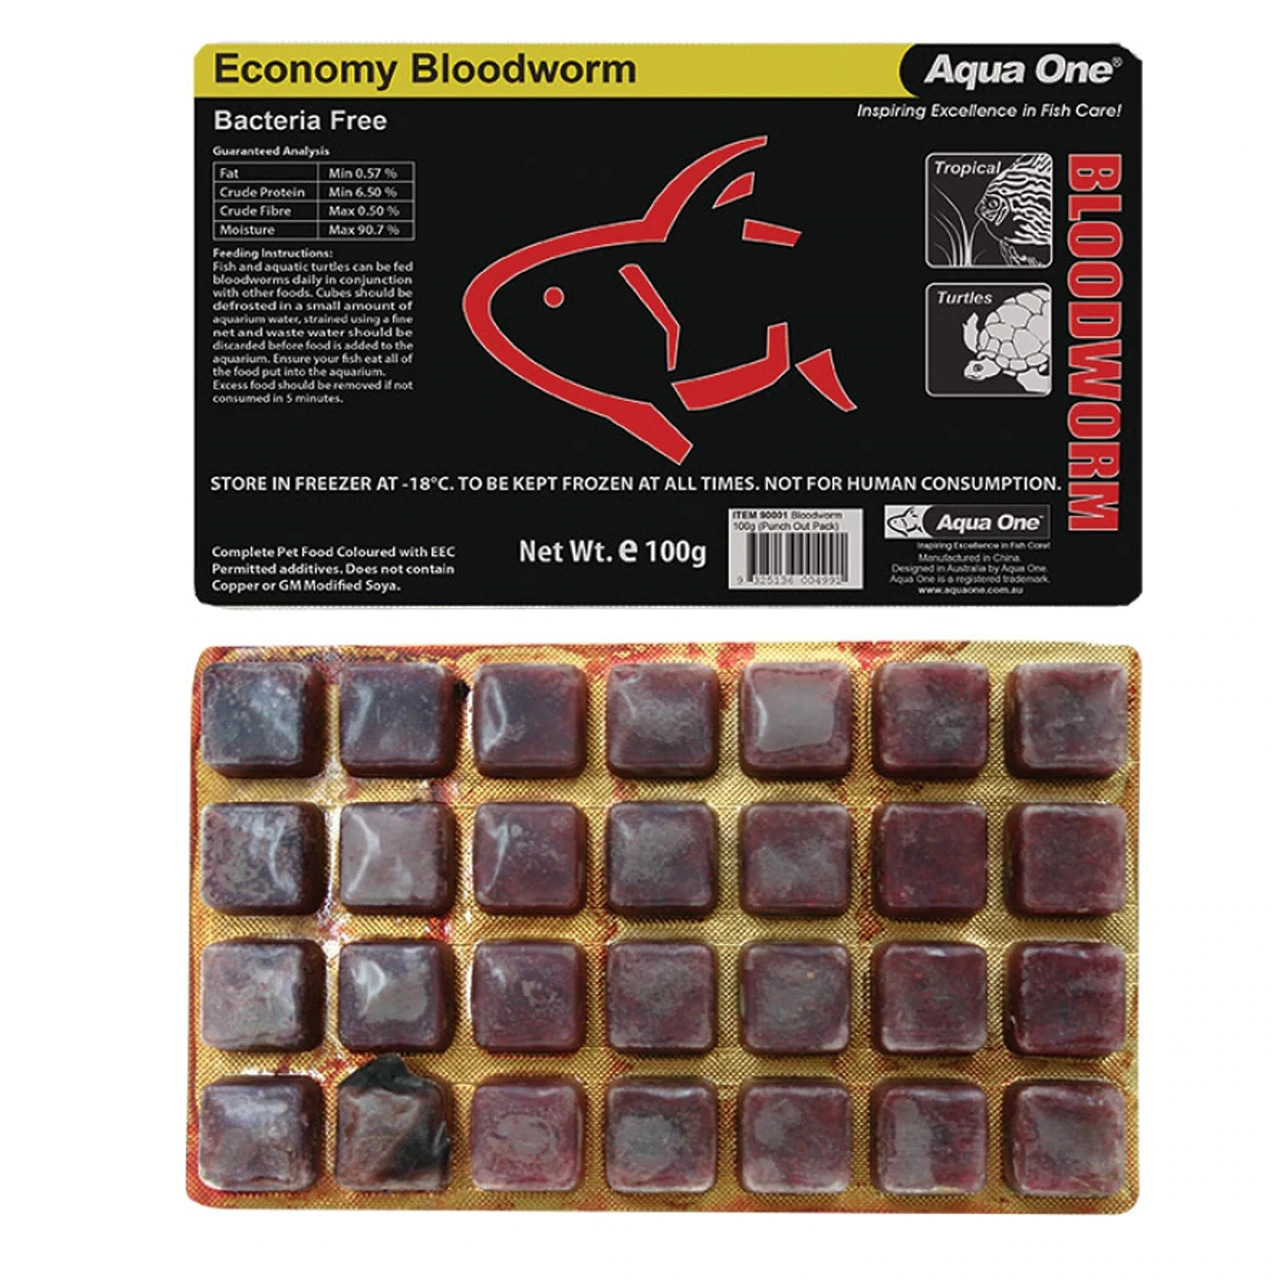 Aqua One Frozen Bloodworm in Blister Pack 100g 10PACK